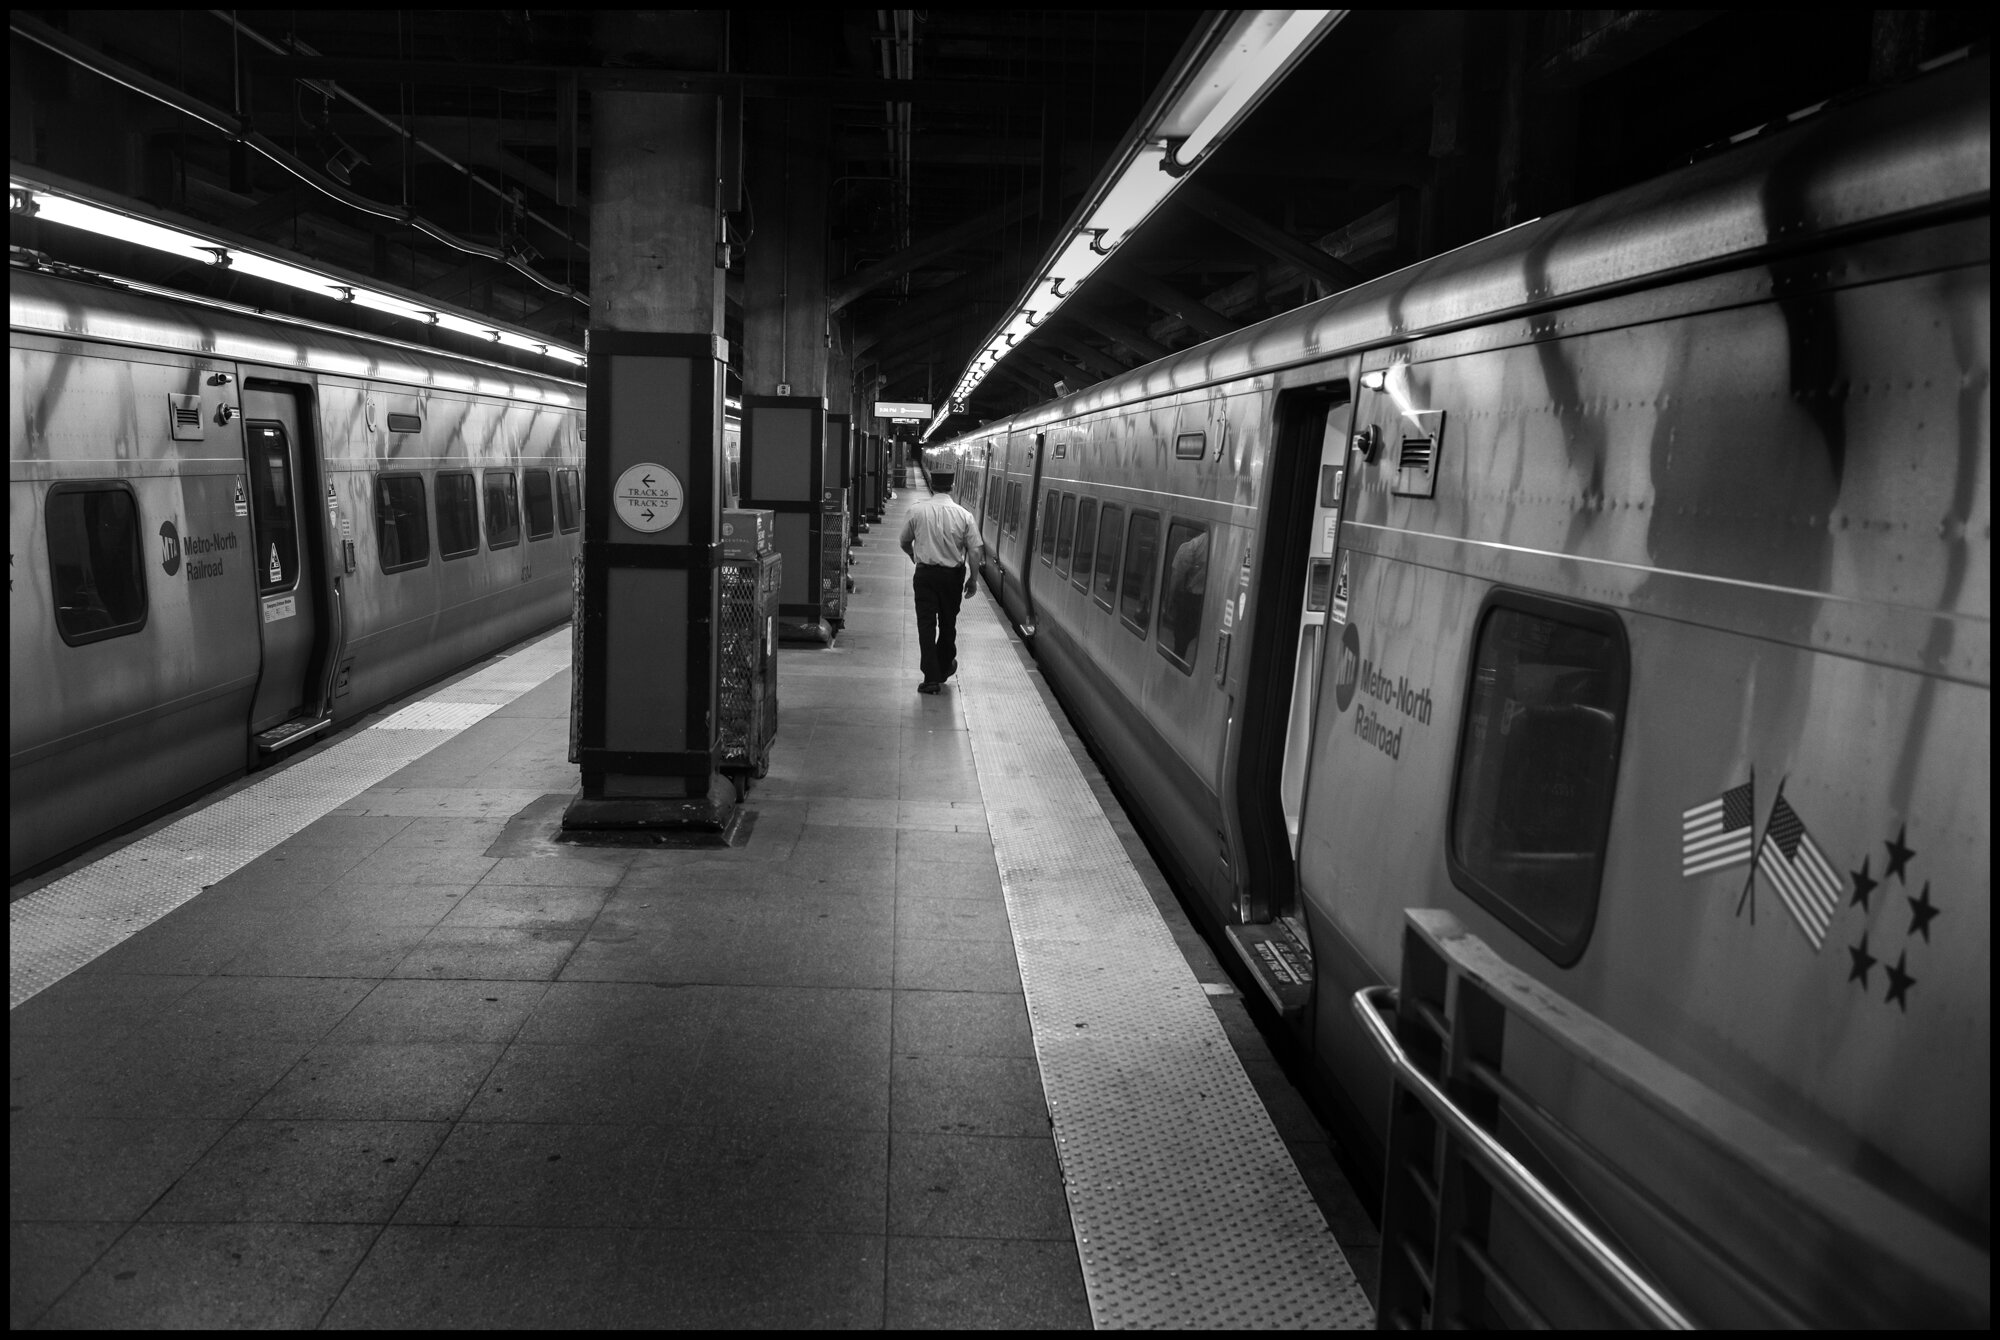  Grand Central Station has become a “ghost town” during the coronavirus crisis.  April 18, 2020. © Peter Turnley  ID# 25-012 